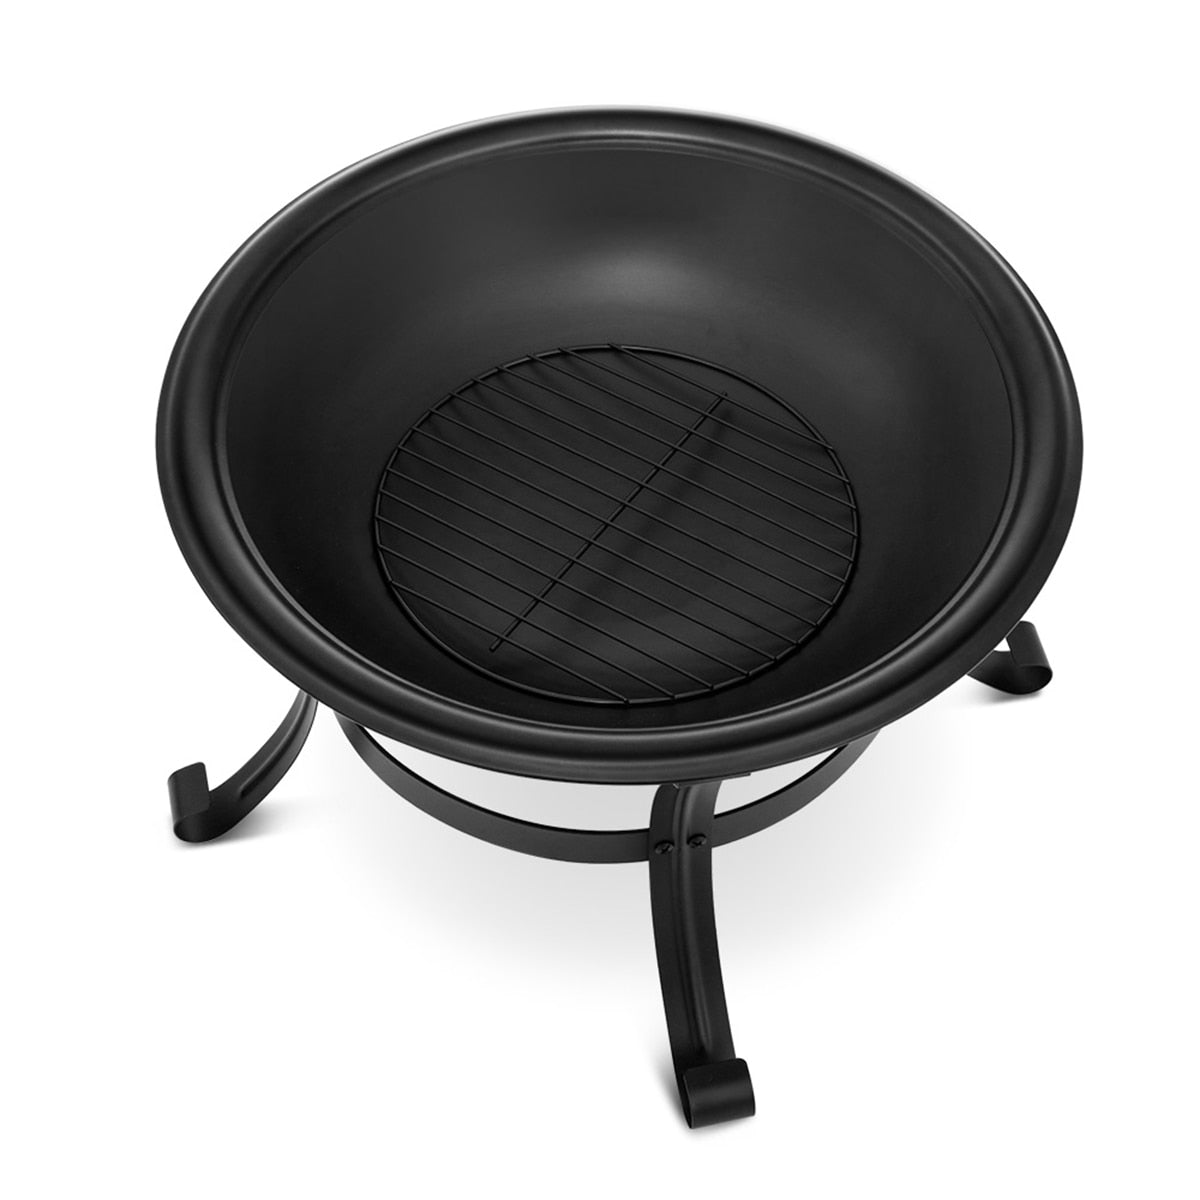 Outdoor Fire Pit - Wood Burning Steel BBQ Grill Bowl with Mesh cover